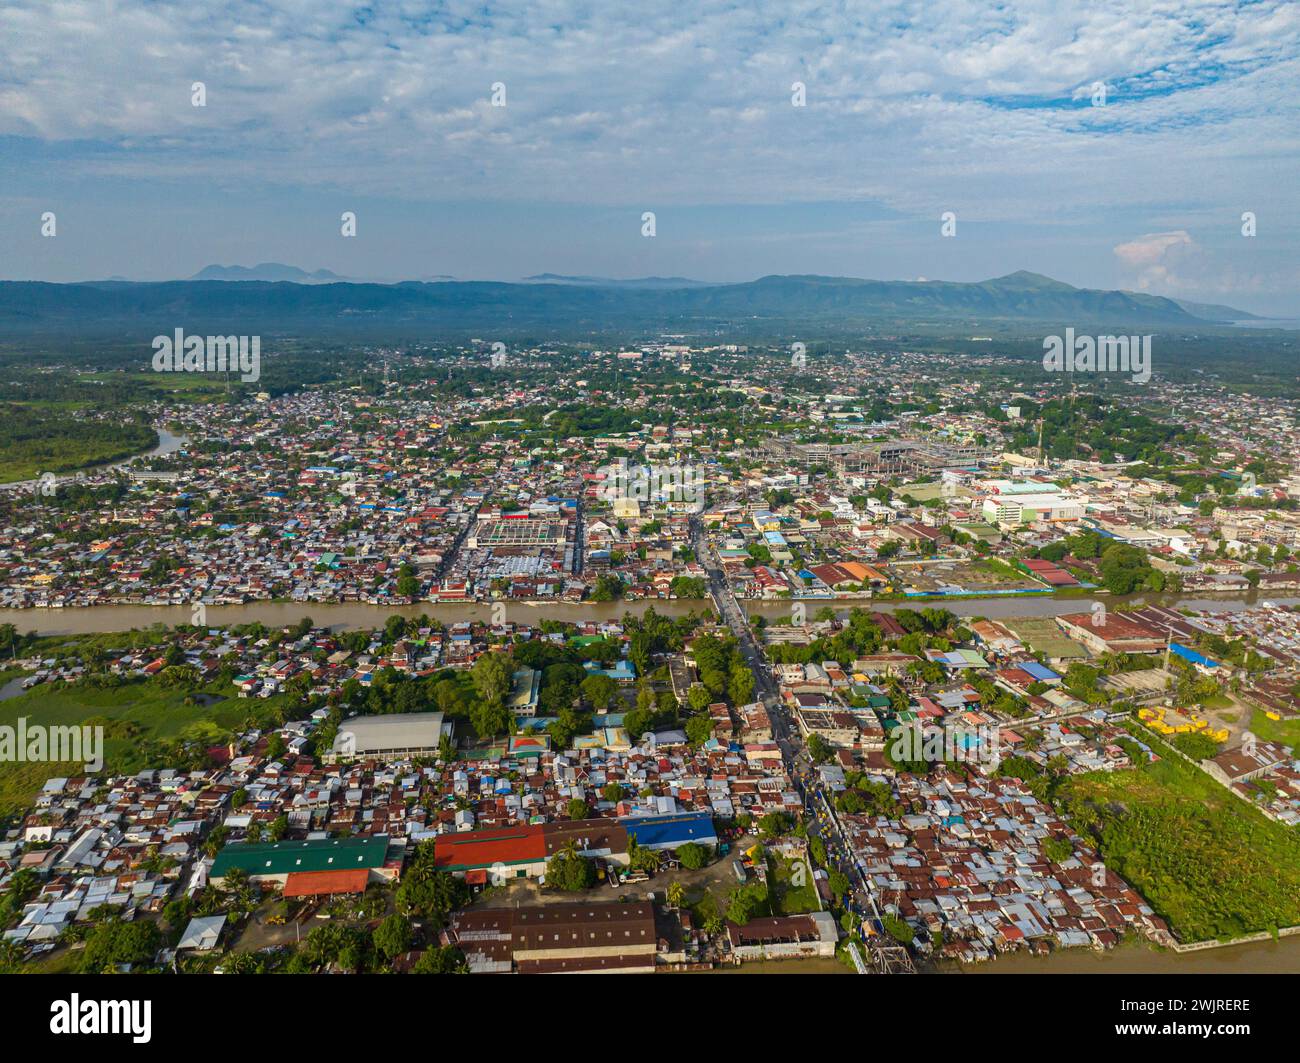 Independent Urban City in Mindanao. Cotabato City, Philippines. Cityscape: Aerial view shot. Stock Photo